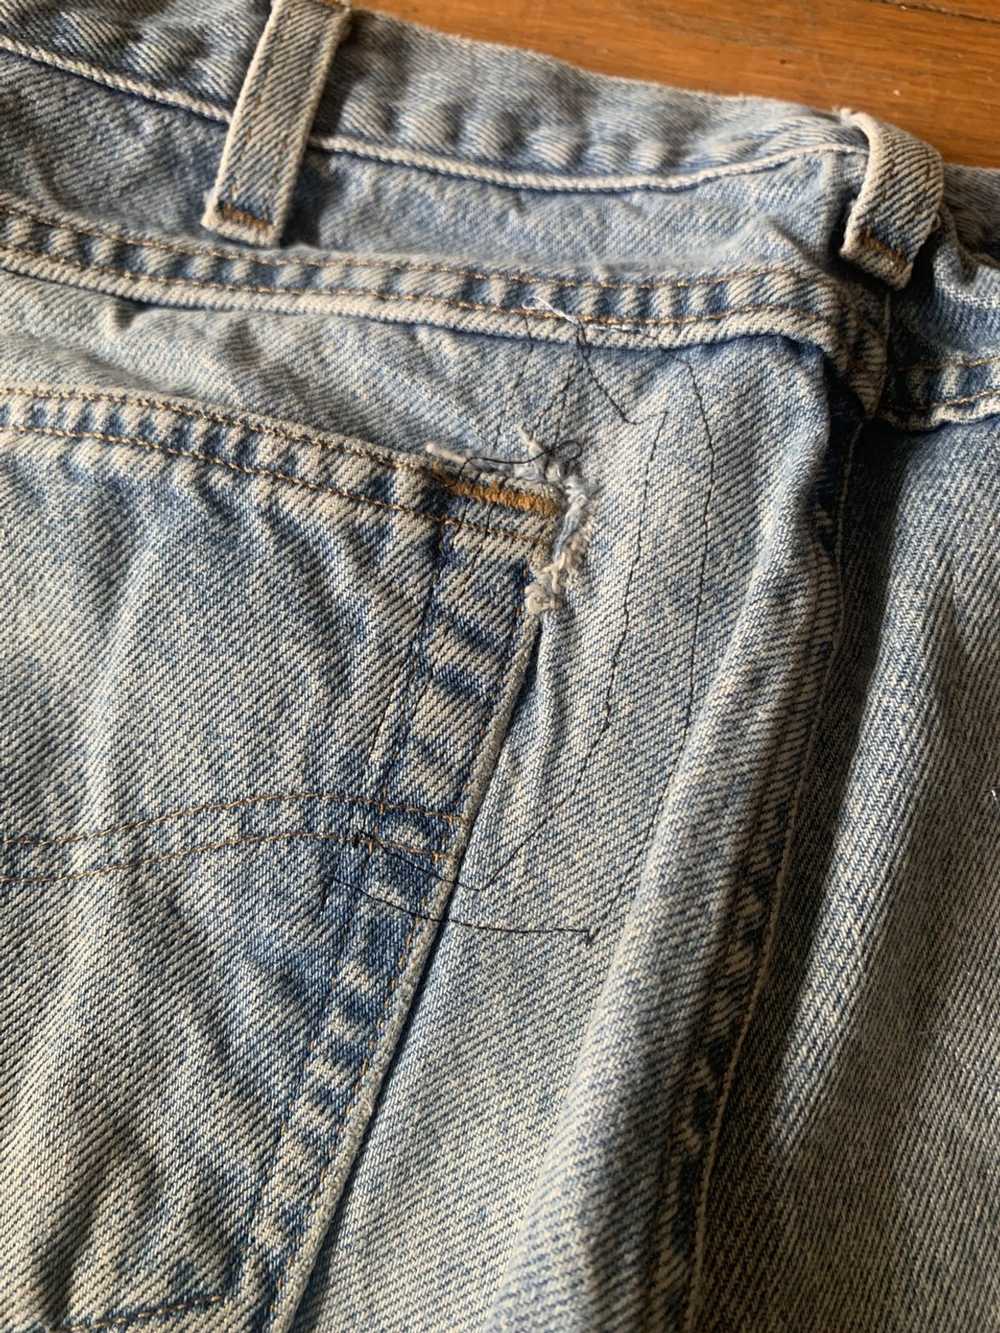 Carhartt Carhartt Patched Repaired Denim Blue Jea… - image 5